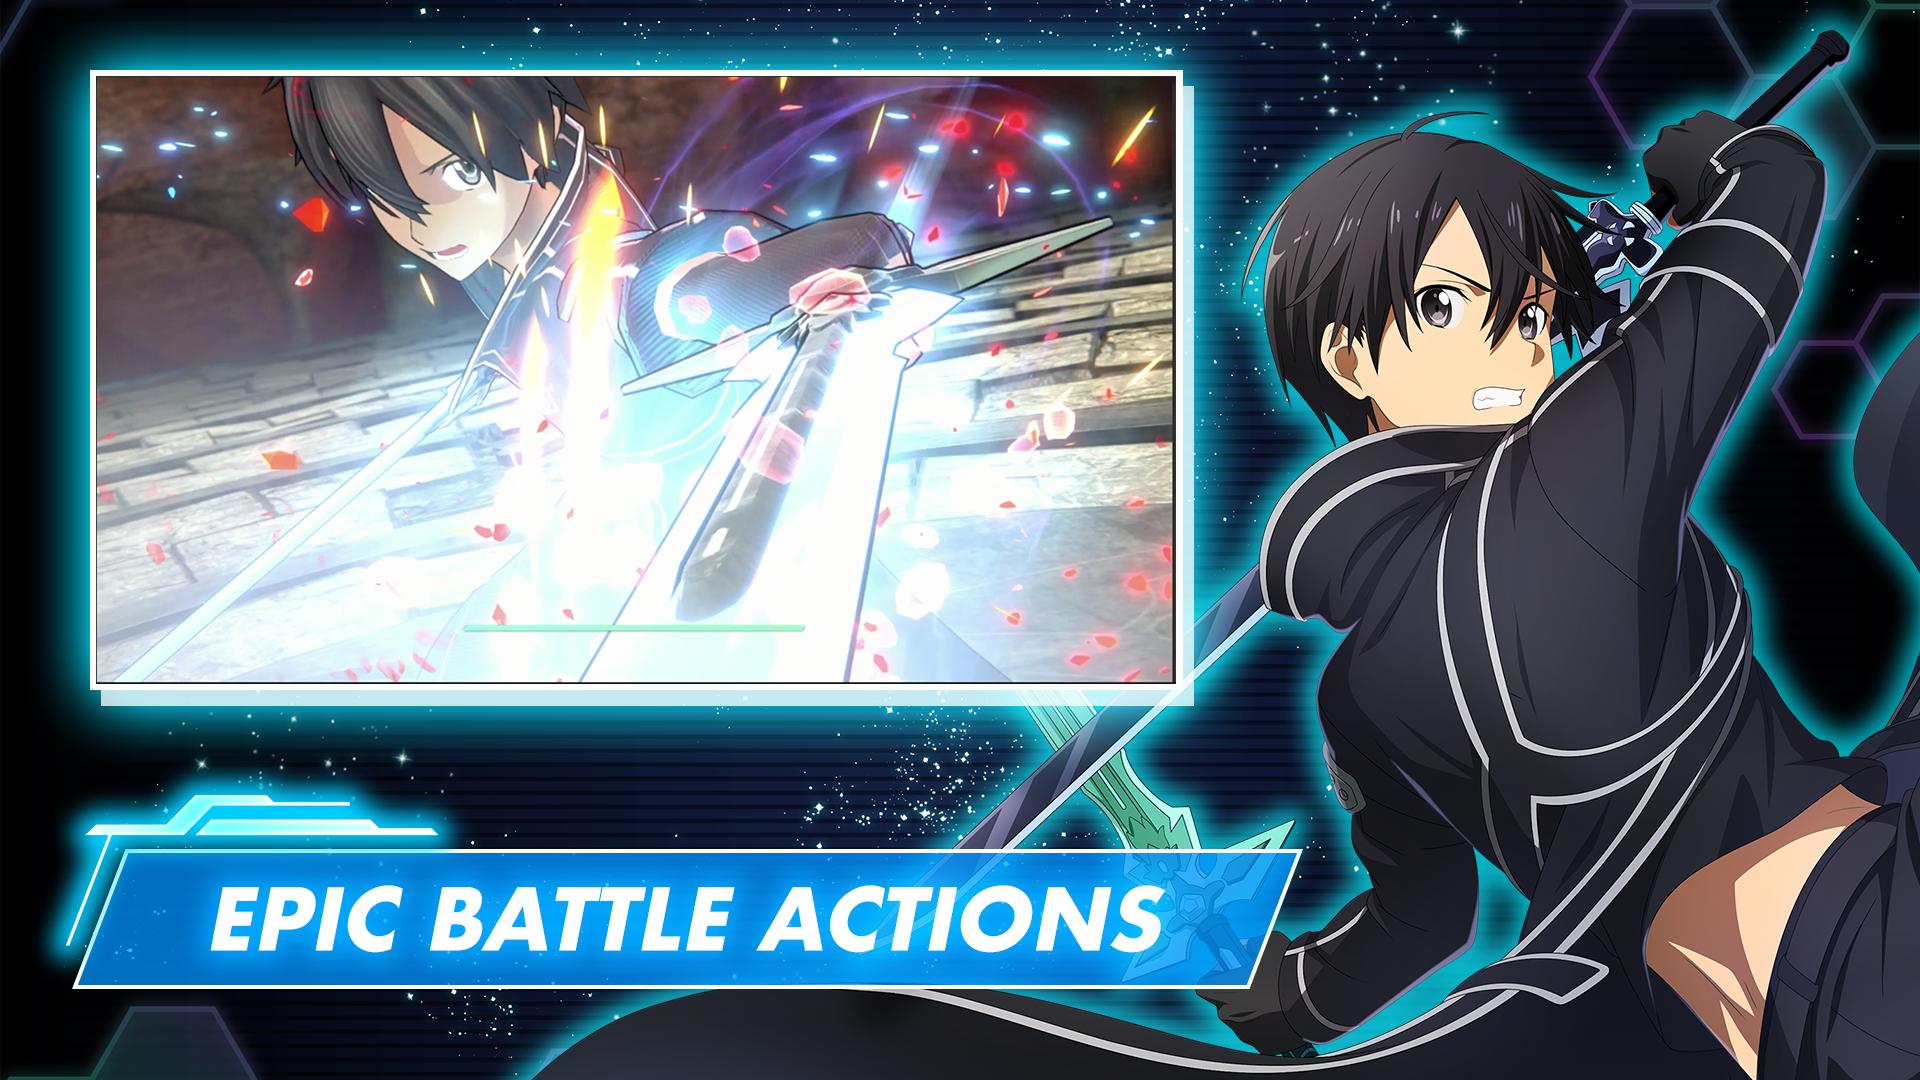 Sword Art Online VS: Sword Art Online is back and better than ever! With its captivating storyline and intense action, fans are in for a treat with the exciting Sword Art Online VS. Watch the image related to Sword Art Online and get lost in a world of virtual reality where anything is possible. Experience the thrill of the battle and become a legend in this epic game.